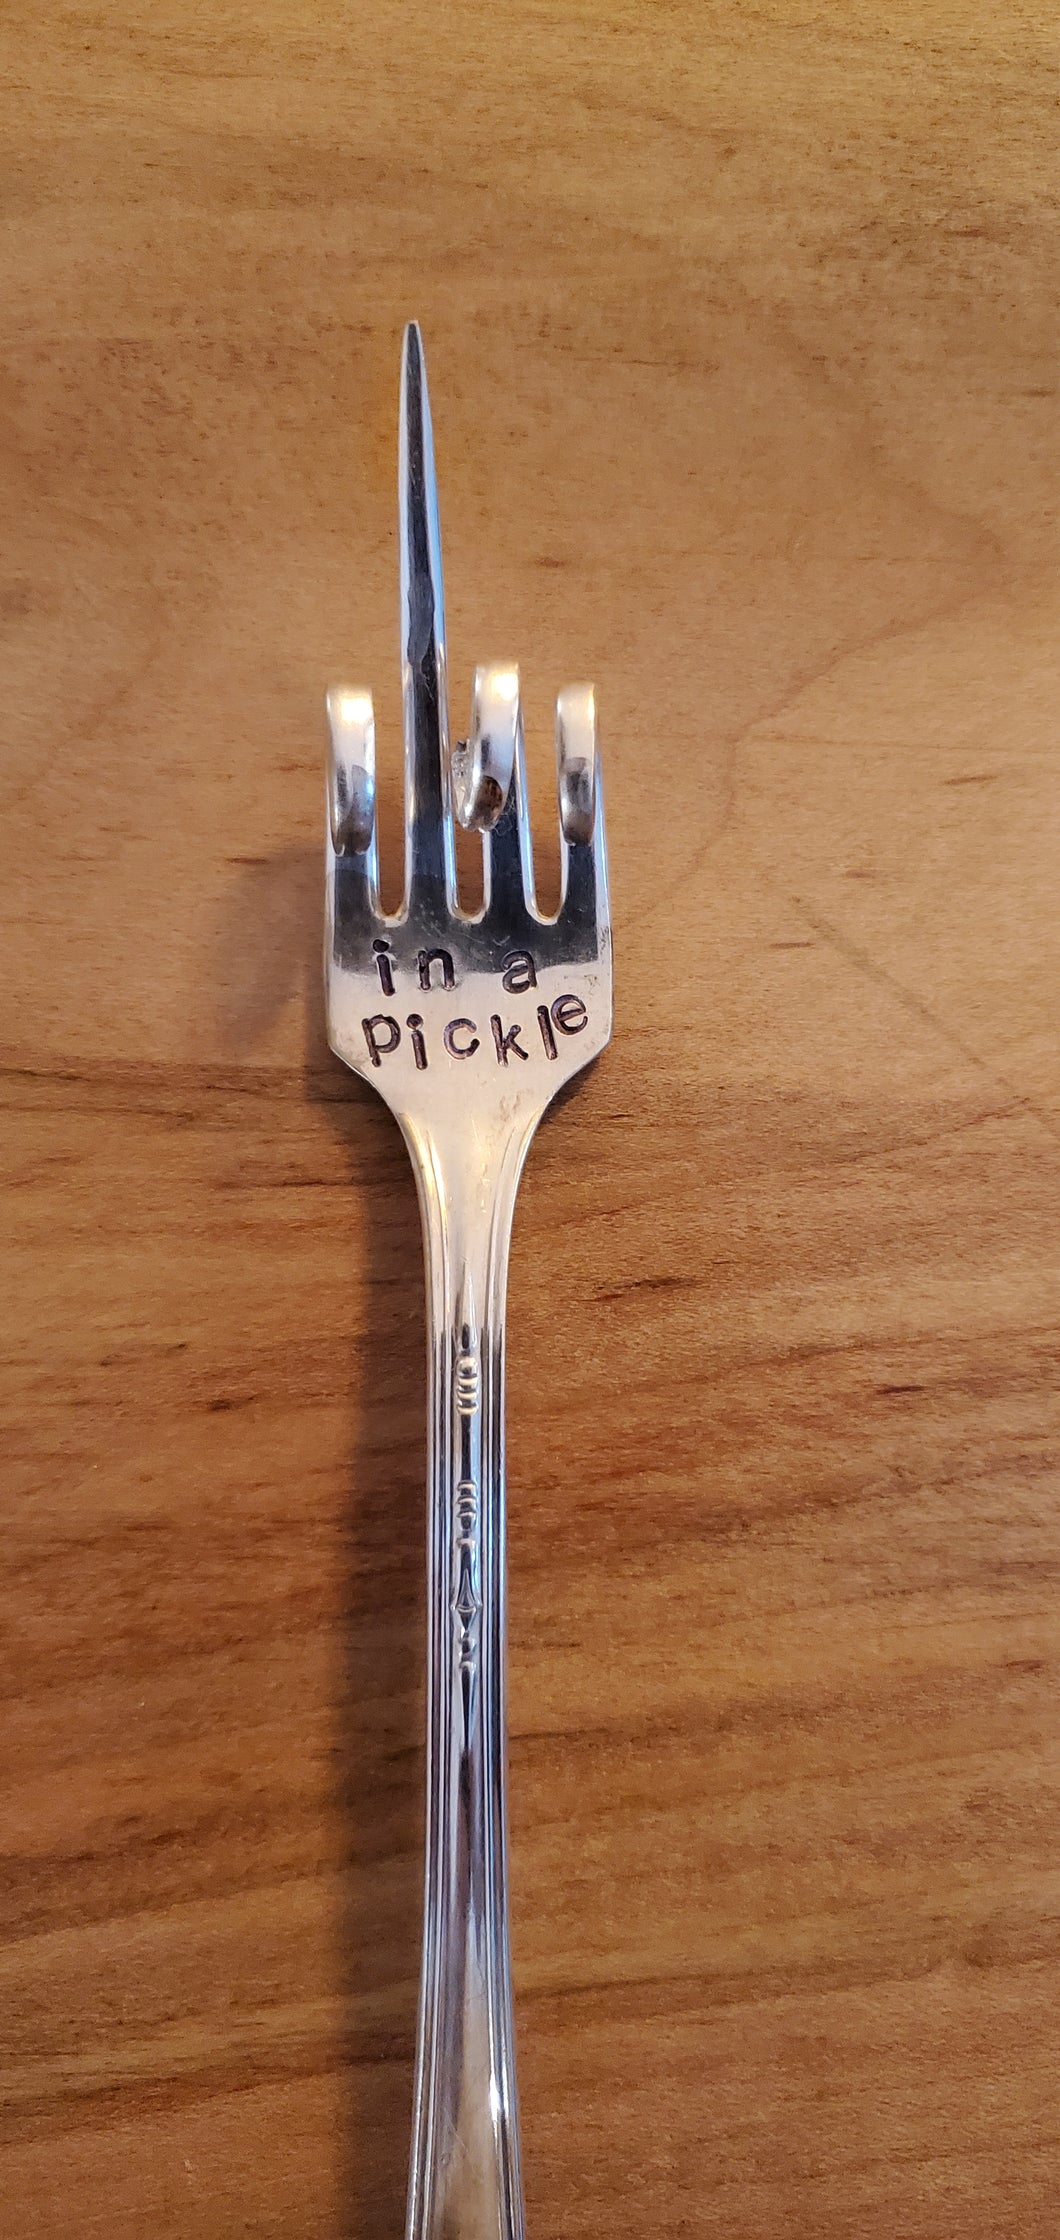 in a pickle fork (2nd tine extended)